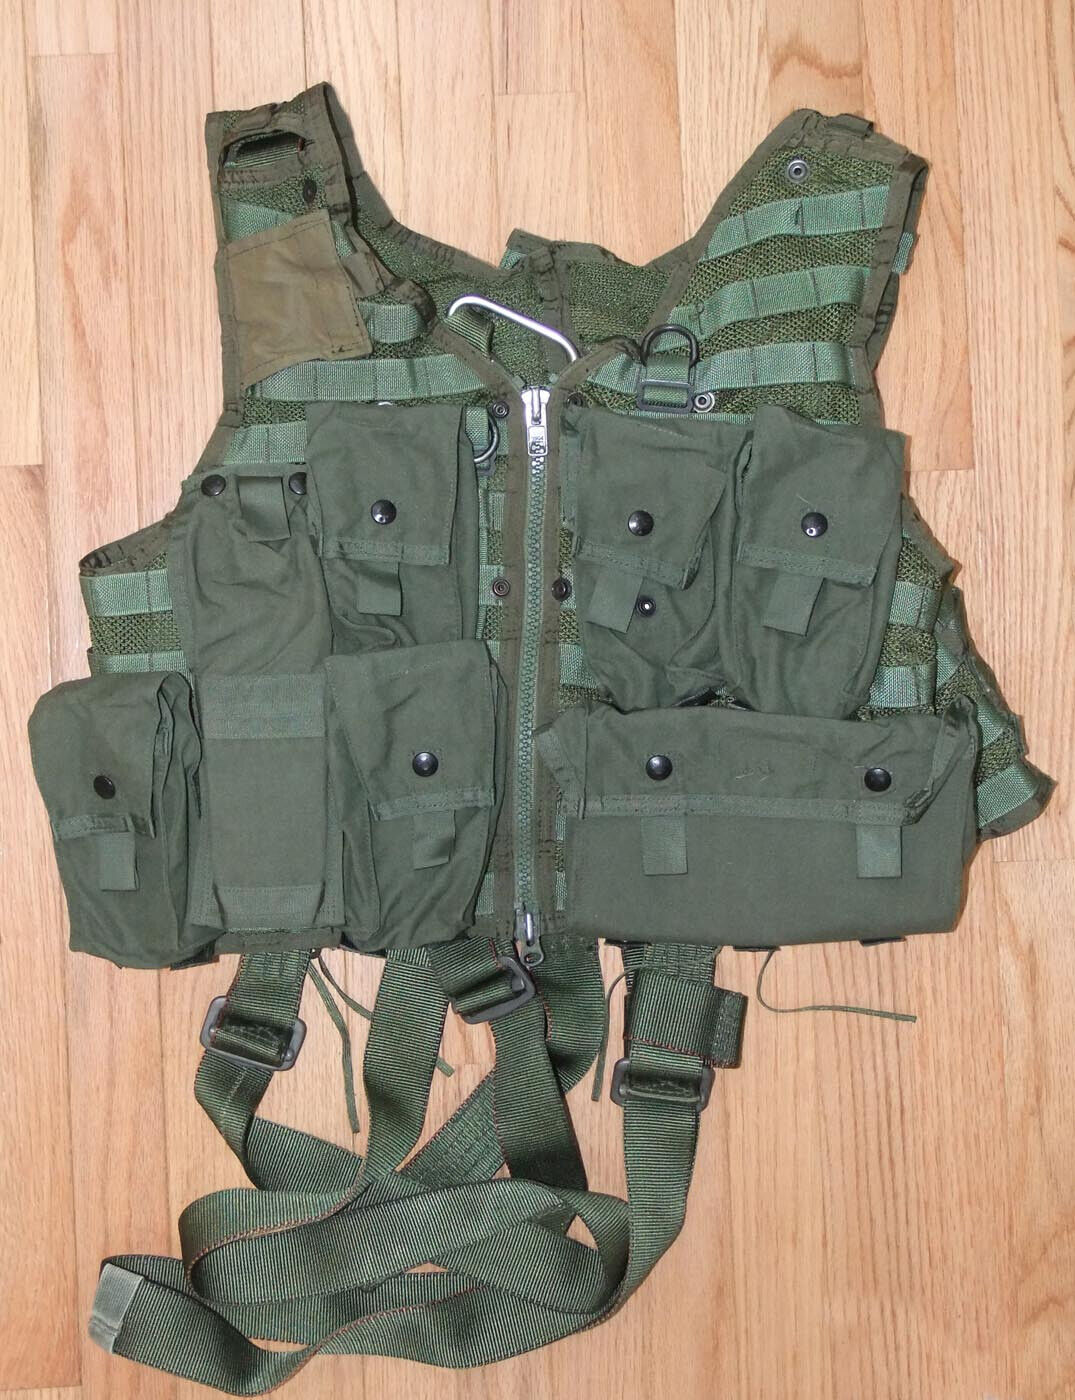 AIRSAVE CWU-33/P22P-18 Aircrew Survival Vest Type 1 Rig